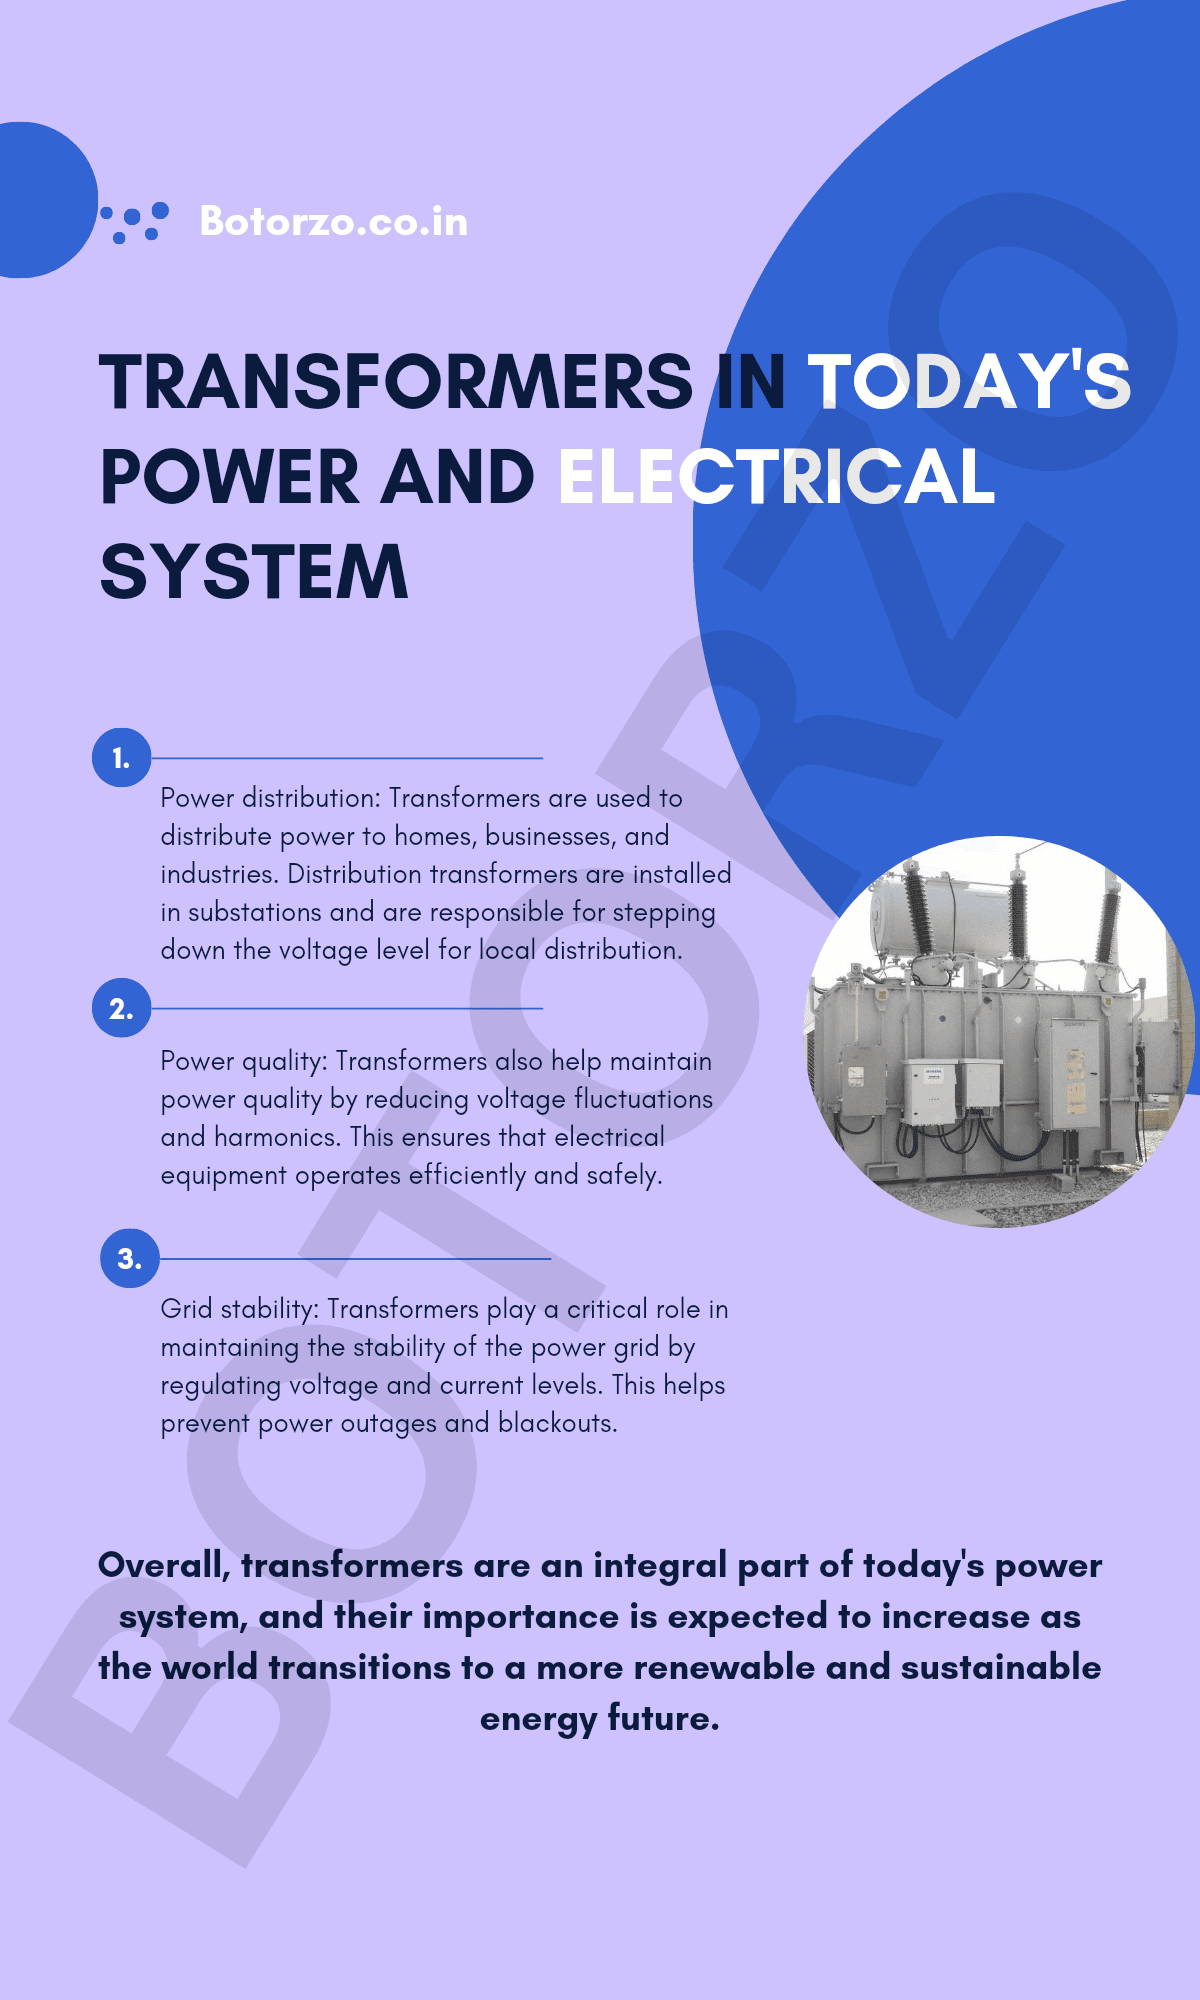 transformers in today's power And Electrical system